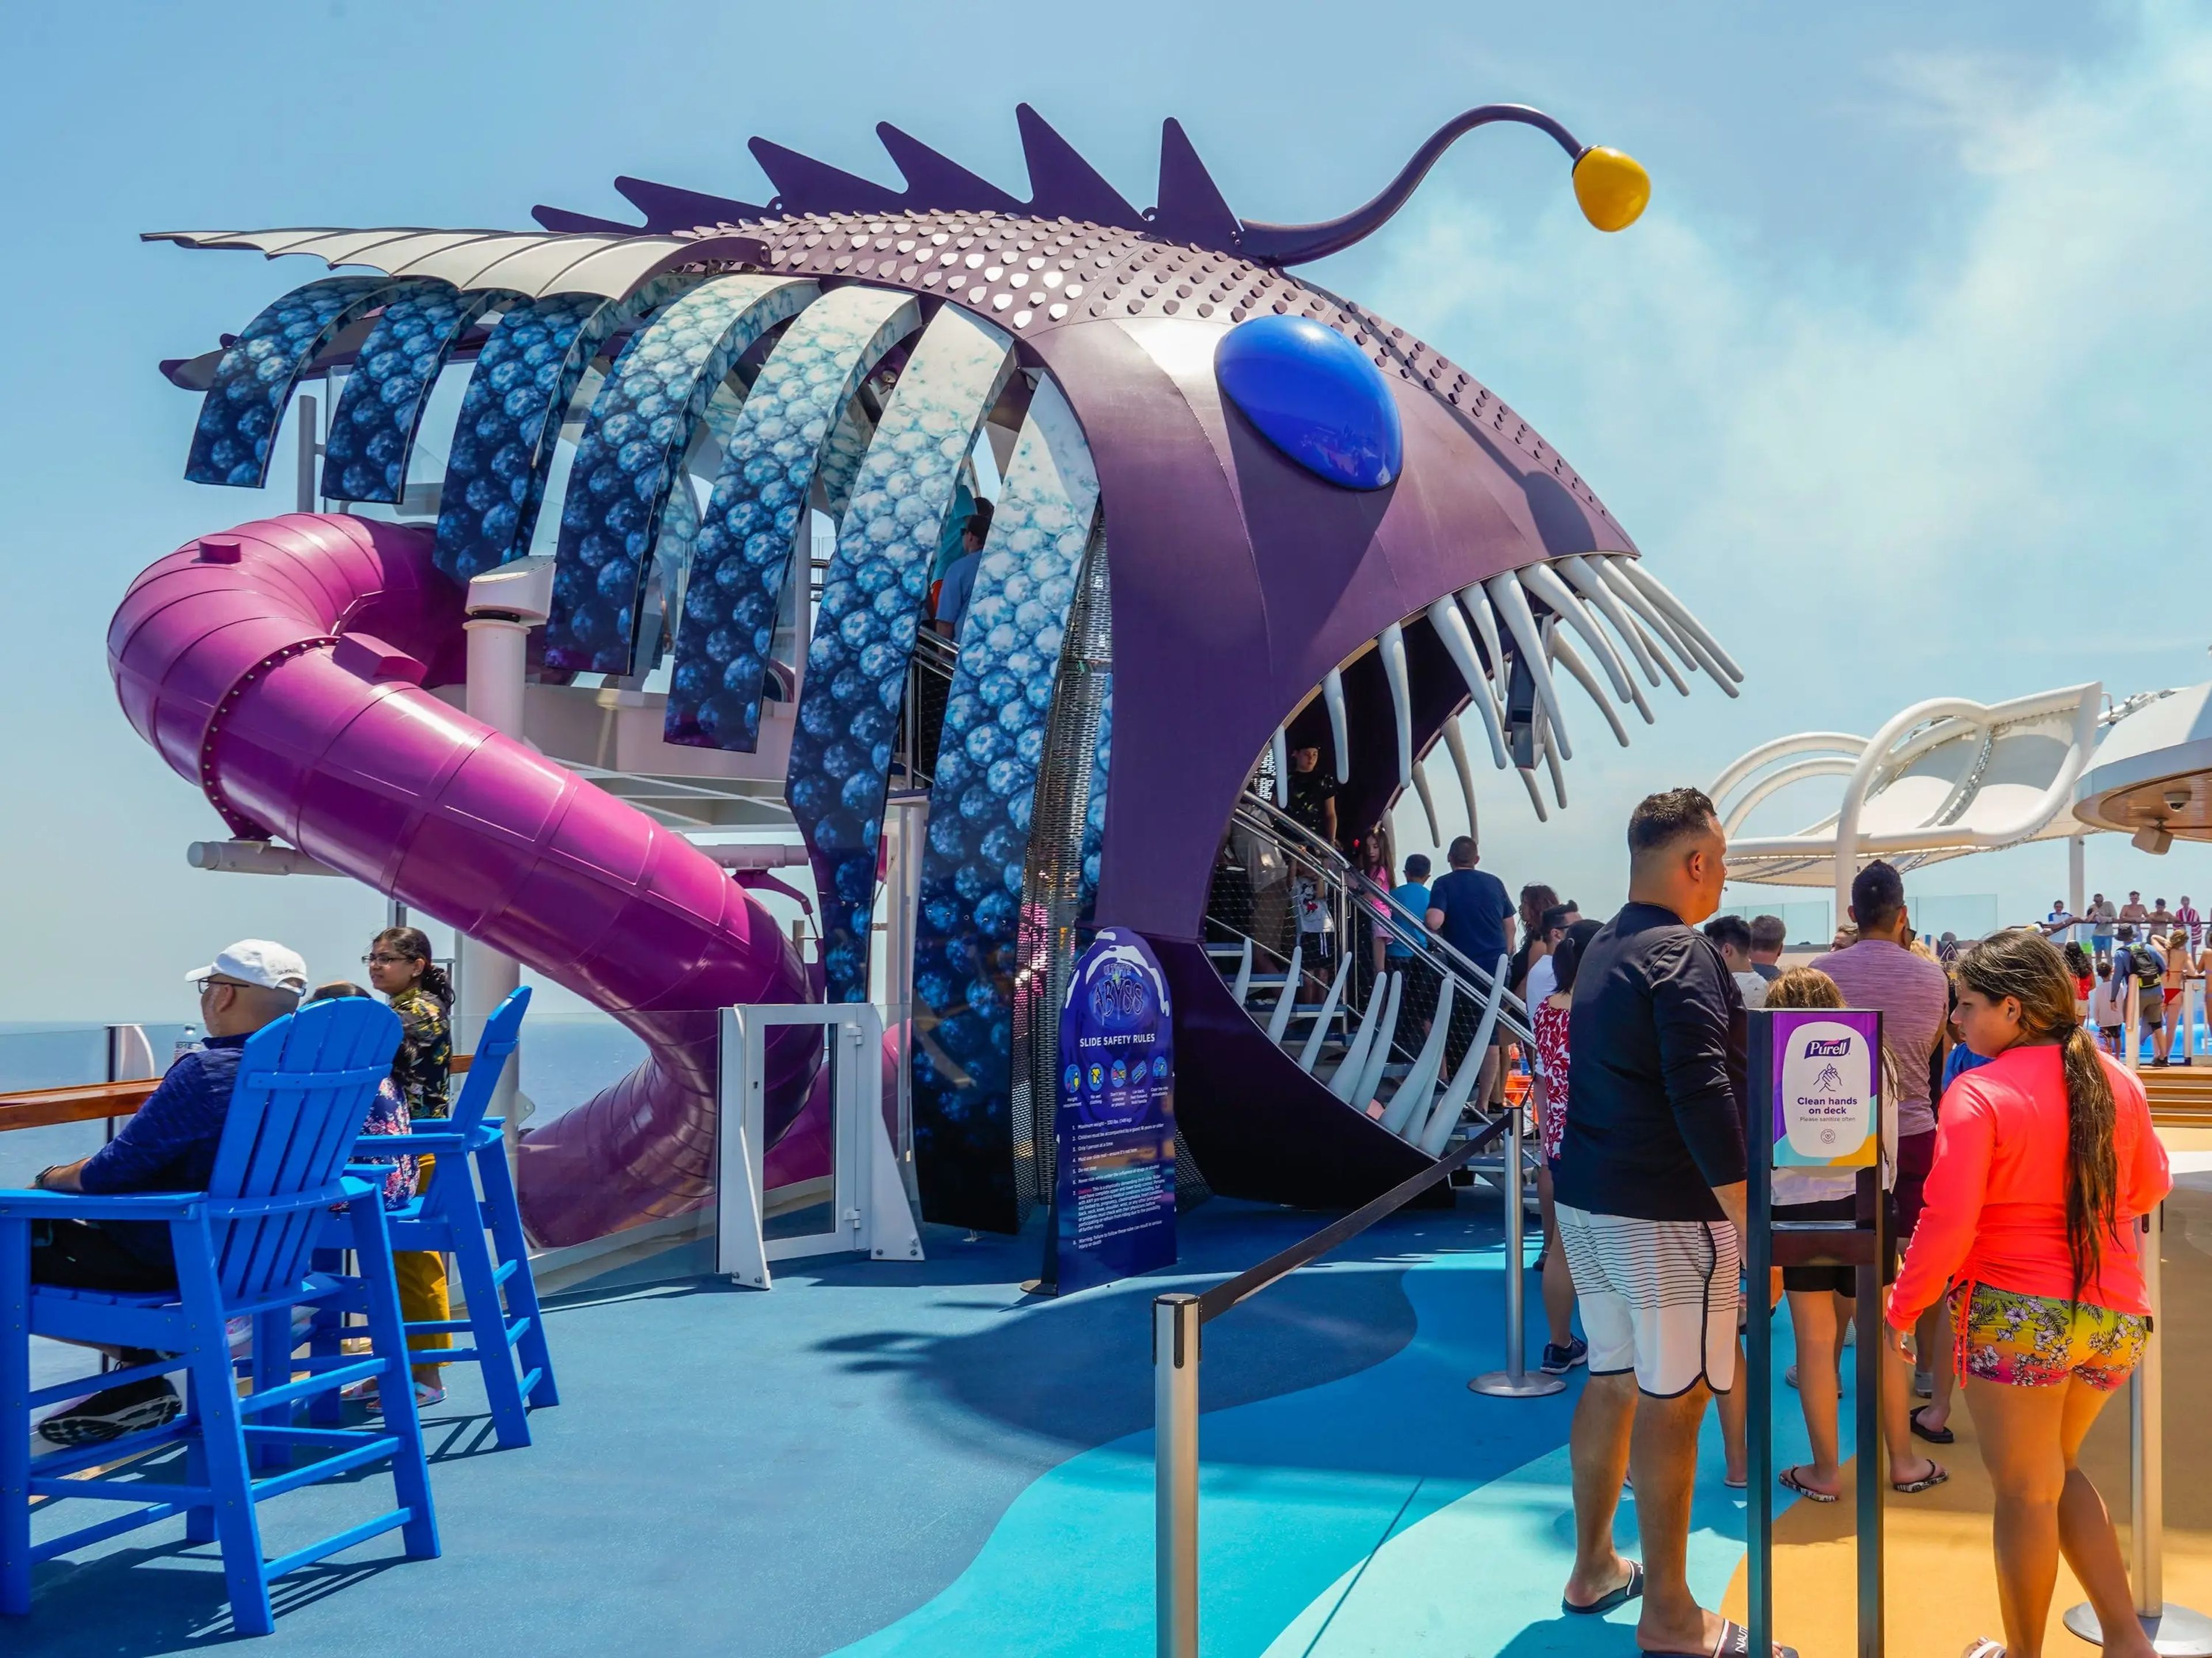 People wait in line to go down a big slide in the shape of a sharp-toothed fish onboard Wonder of the Seas